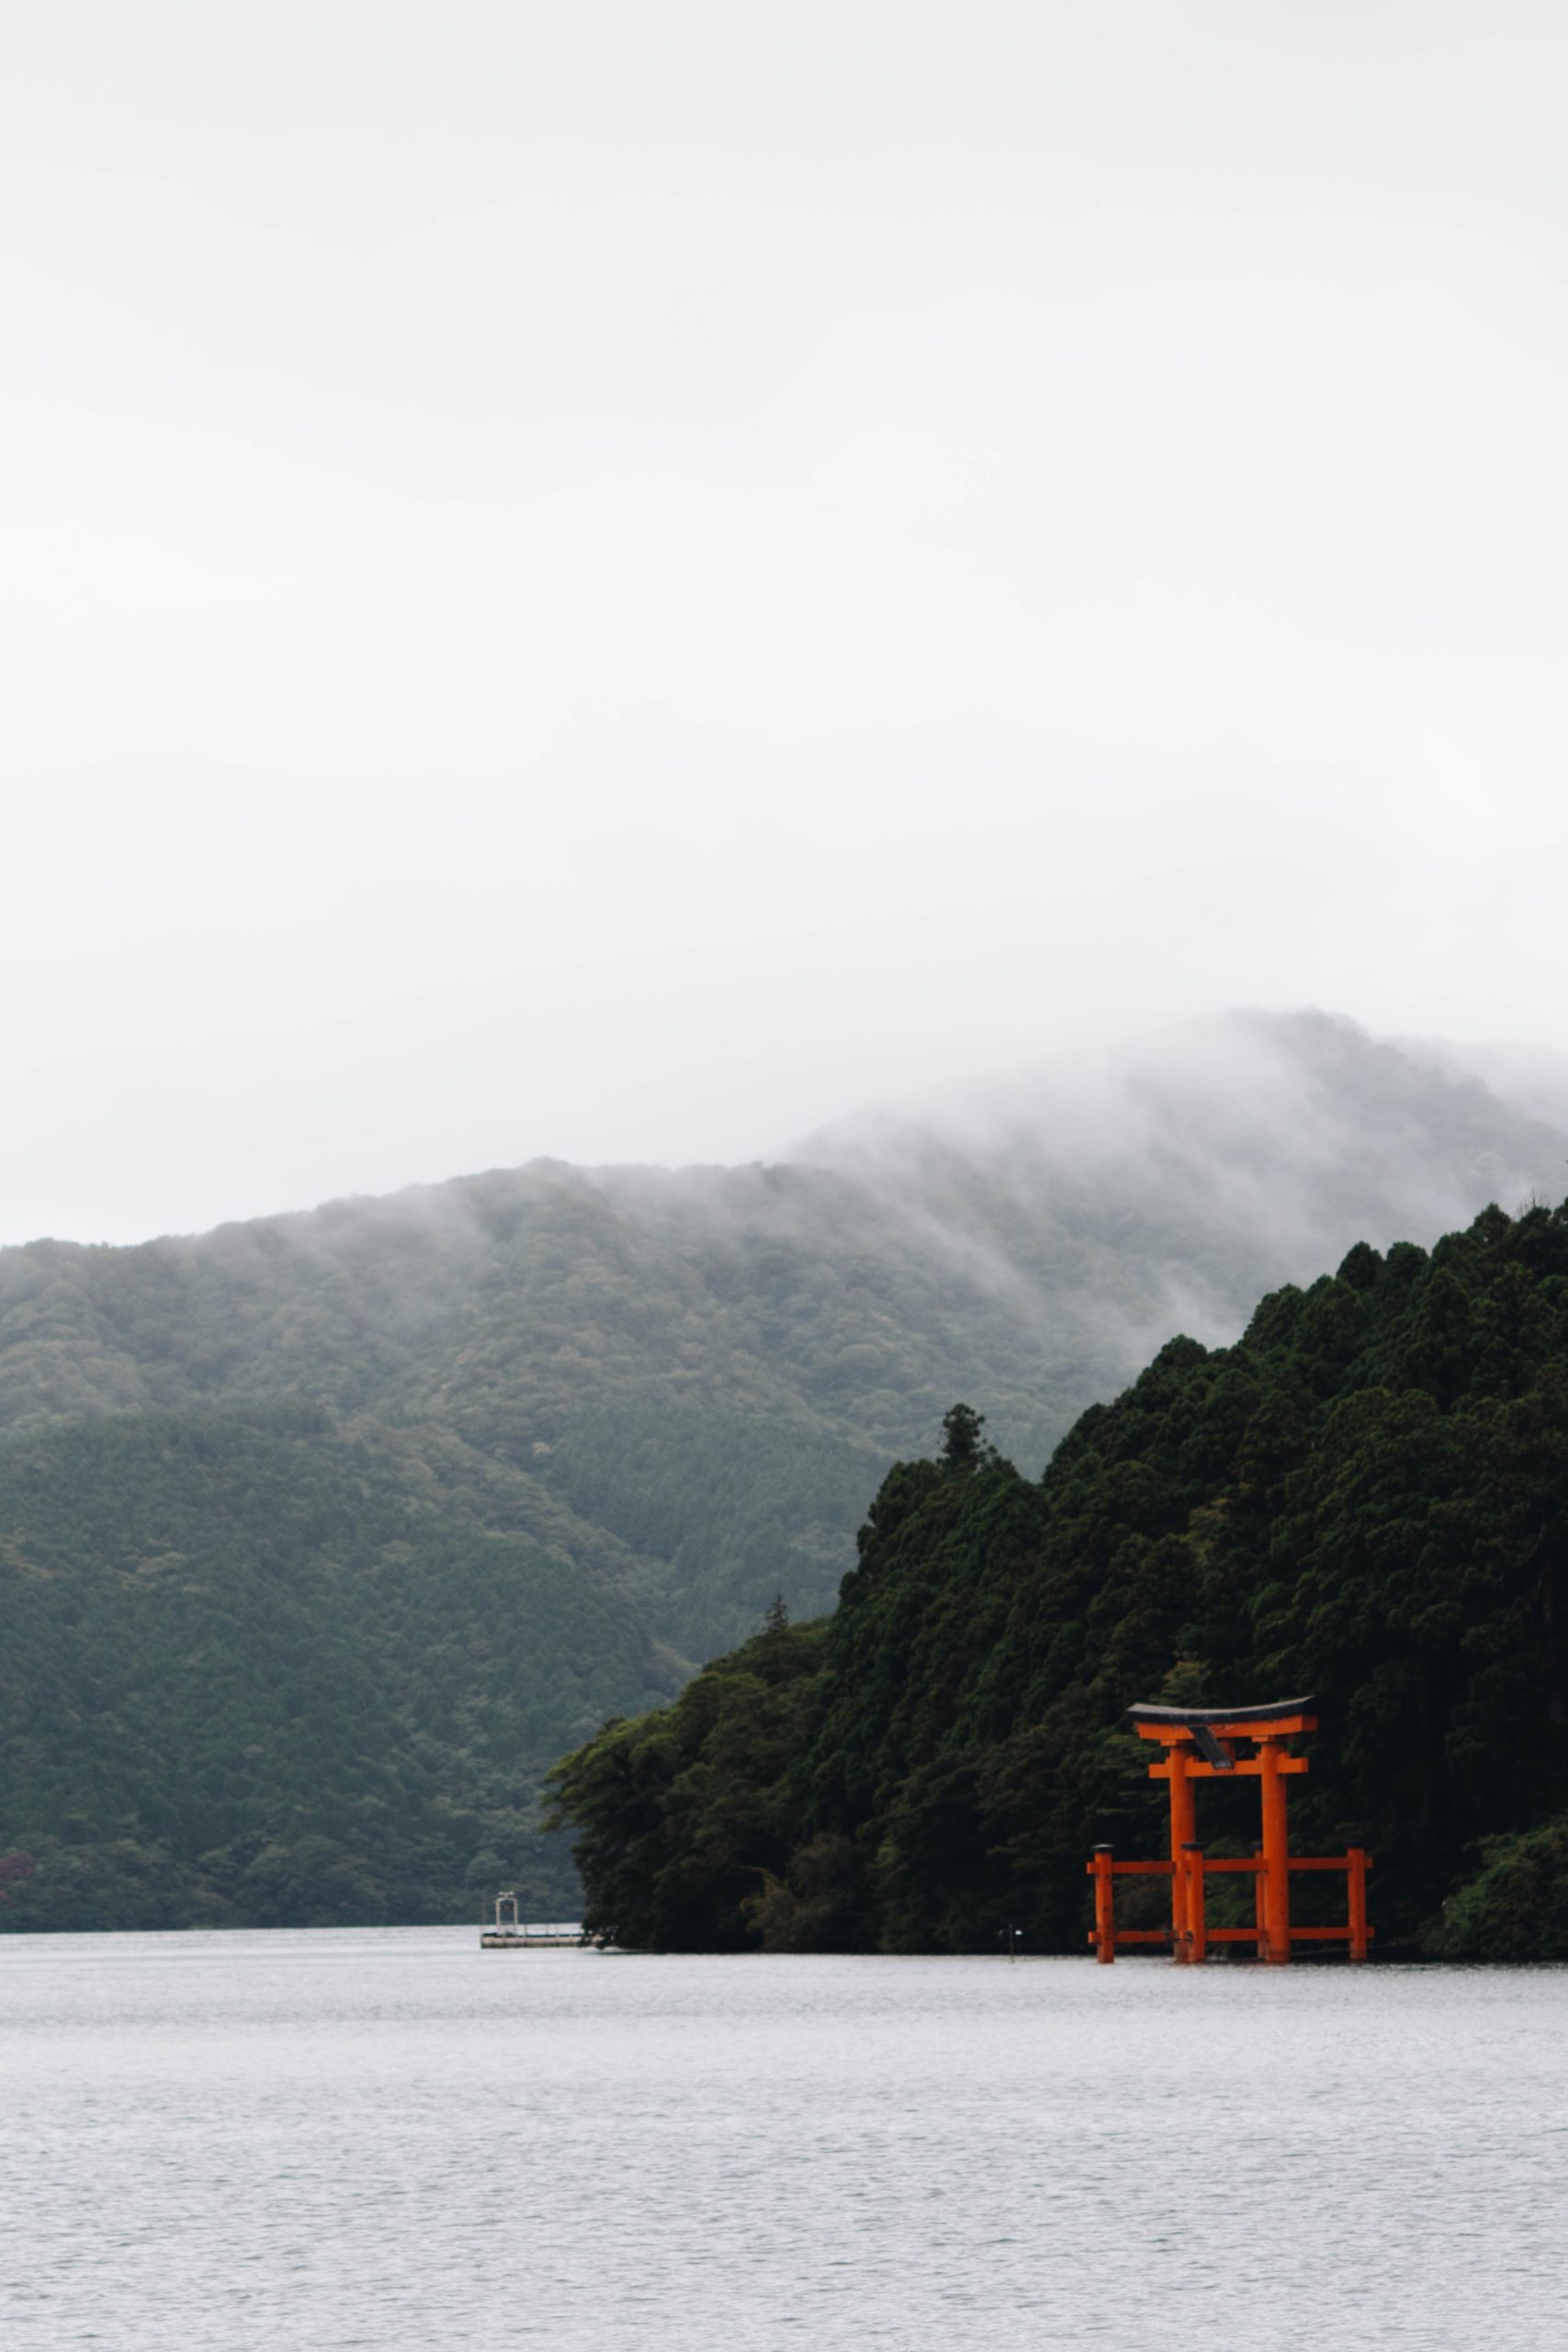 The Ultimate Hakone Itinerary: How to Spend 2 Epic Days in Hakone